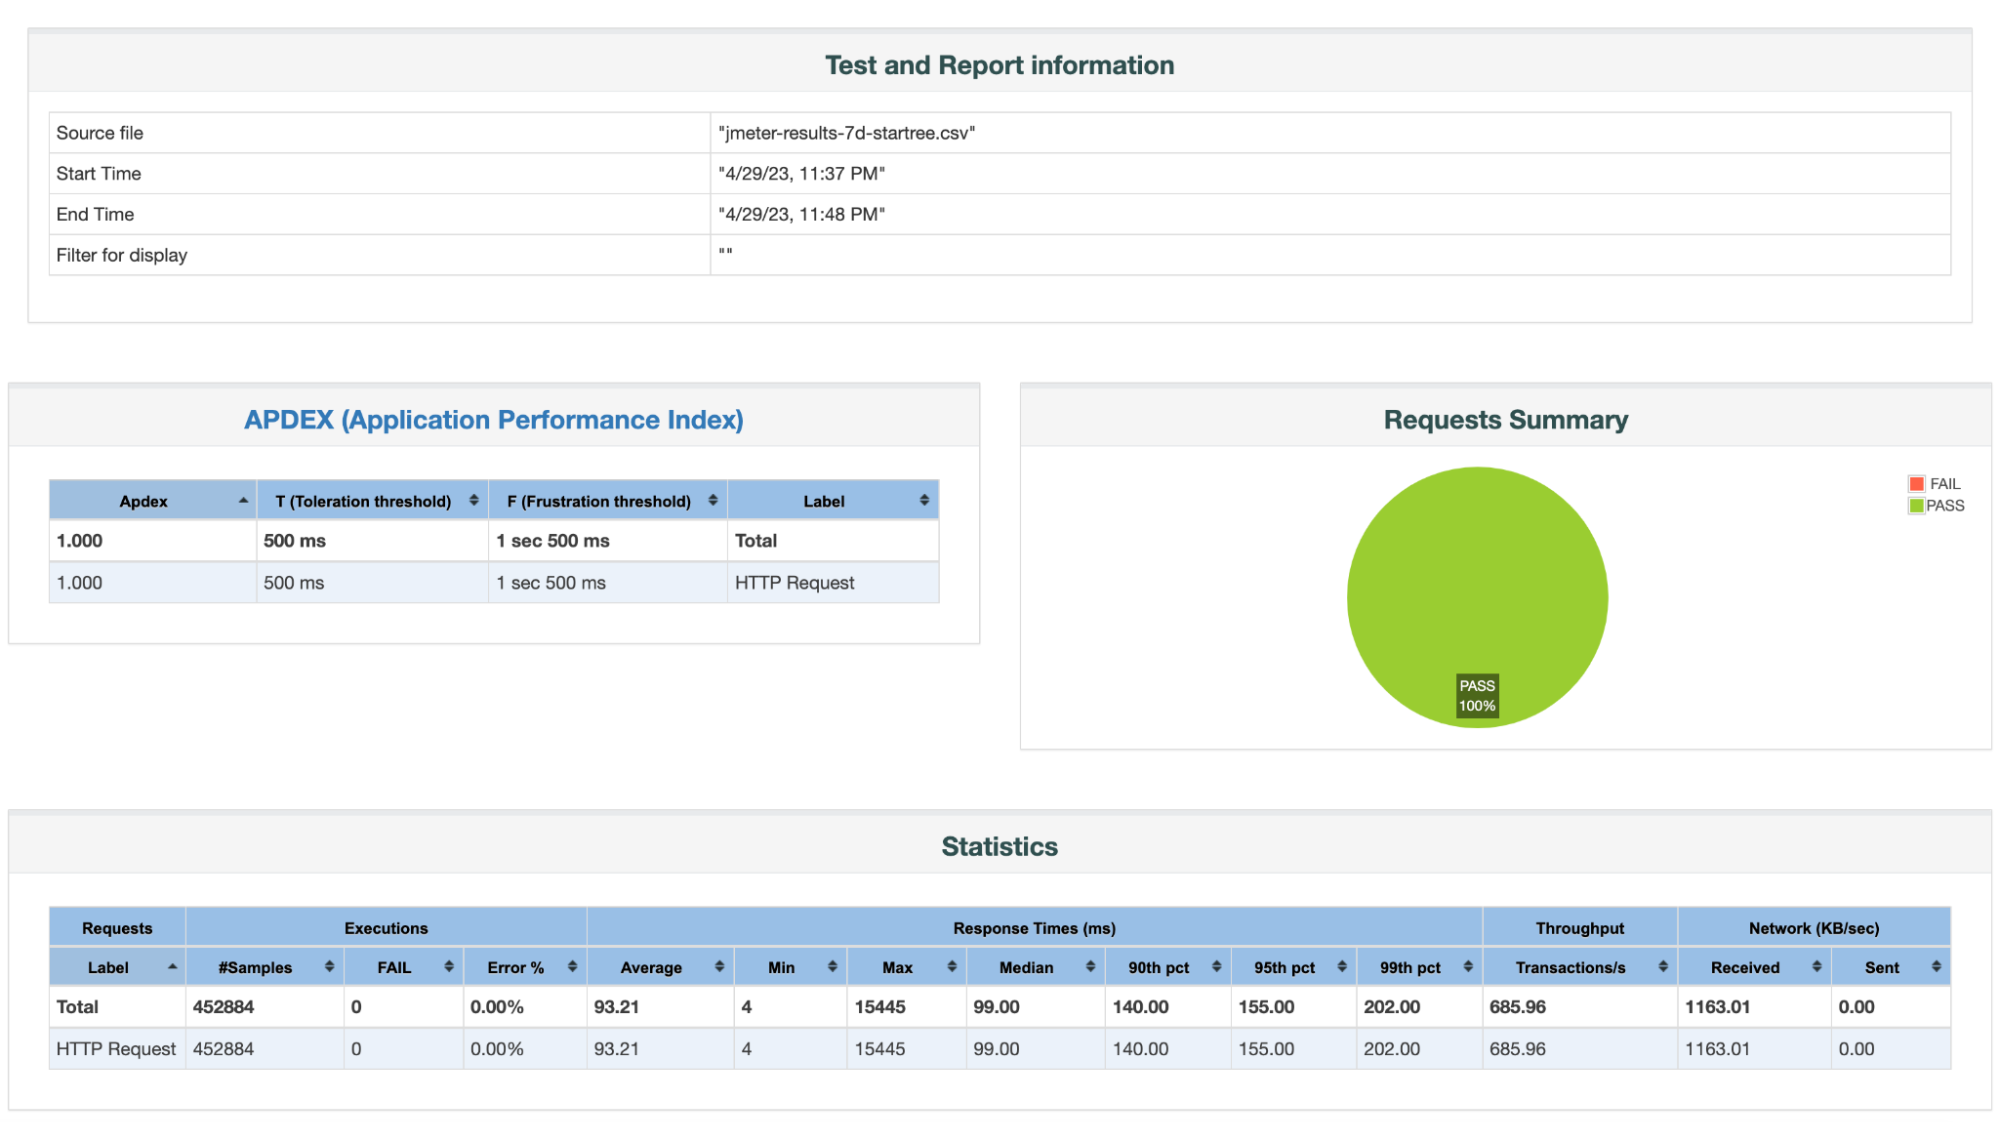 JMeter report with test and report information, APDEX, Requests Summary, and Statistics for 64 concurrent threads